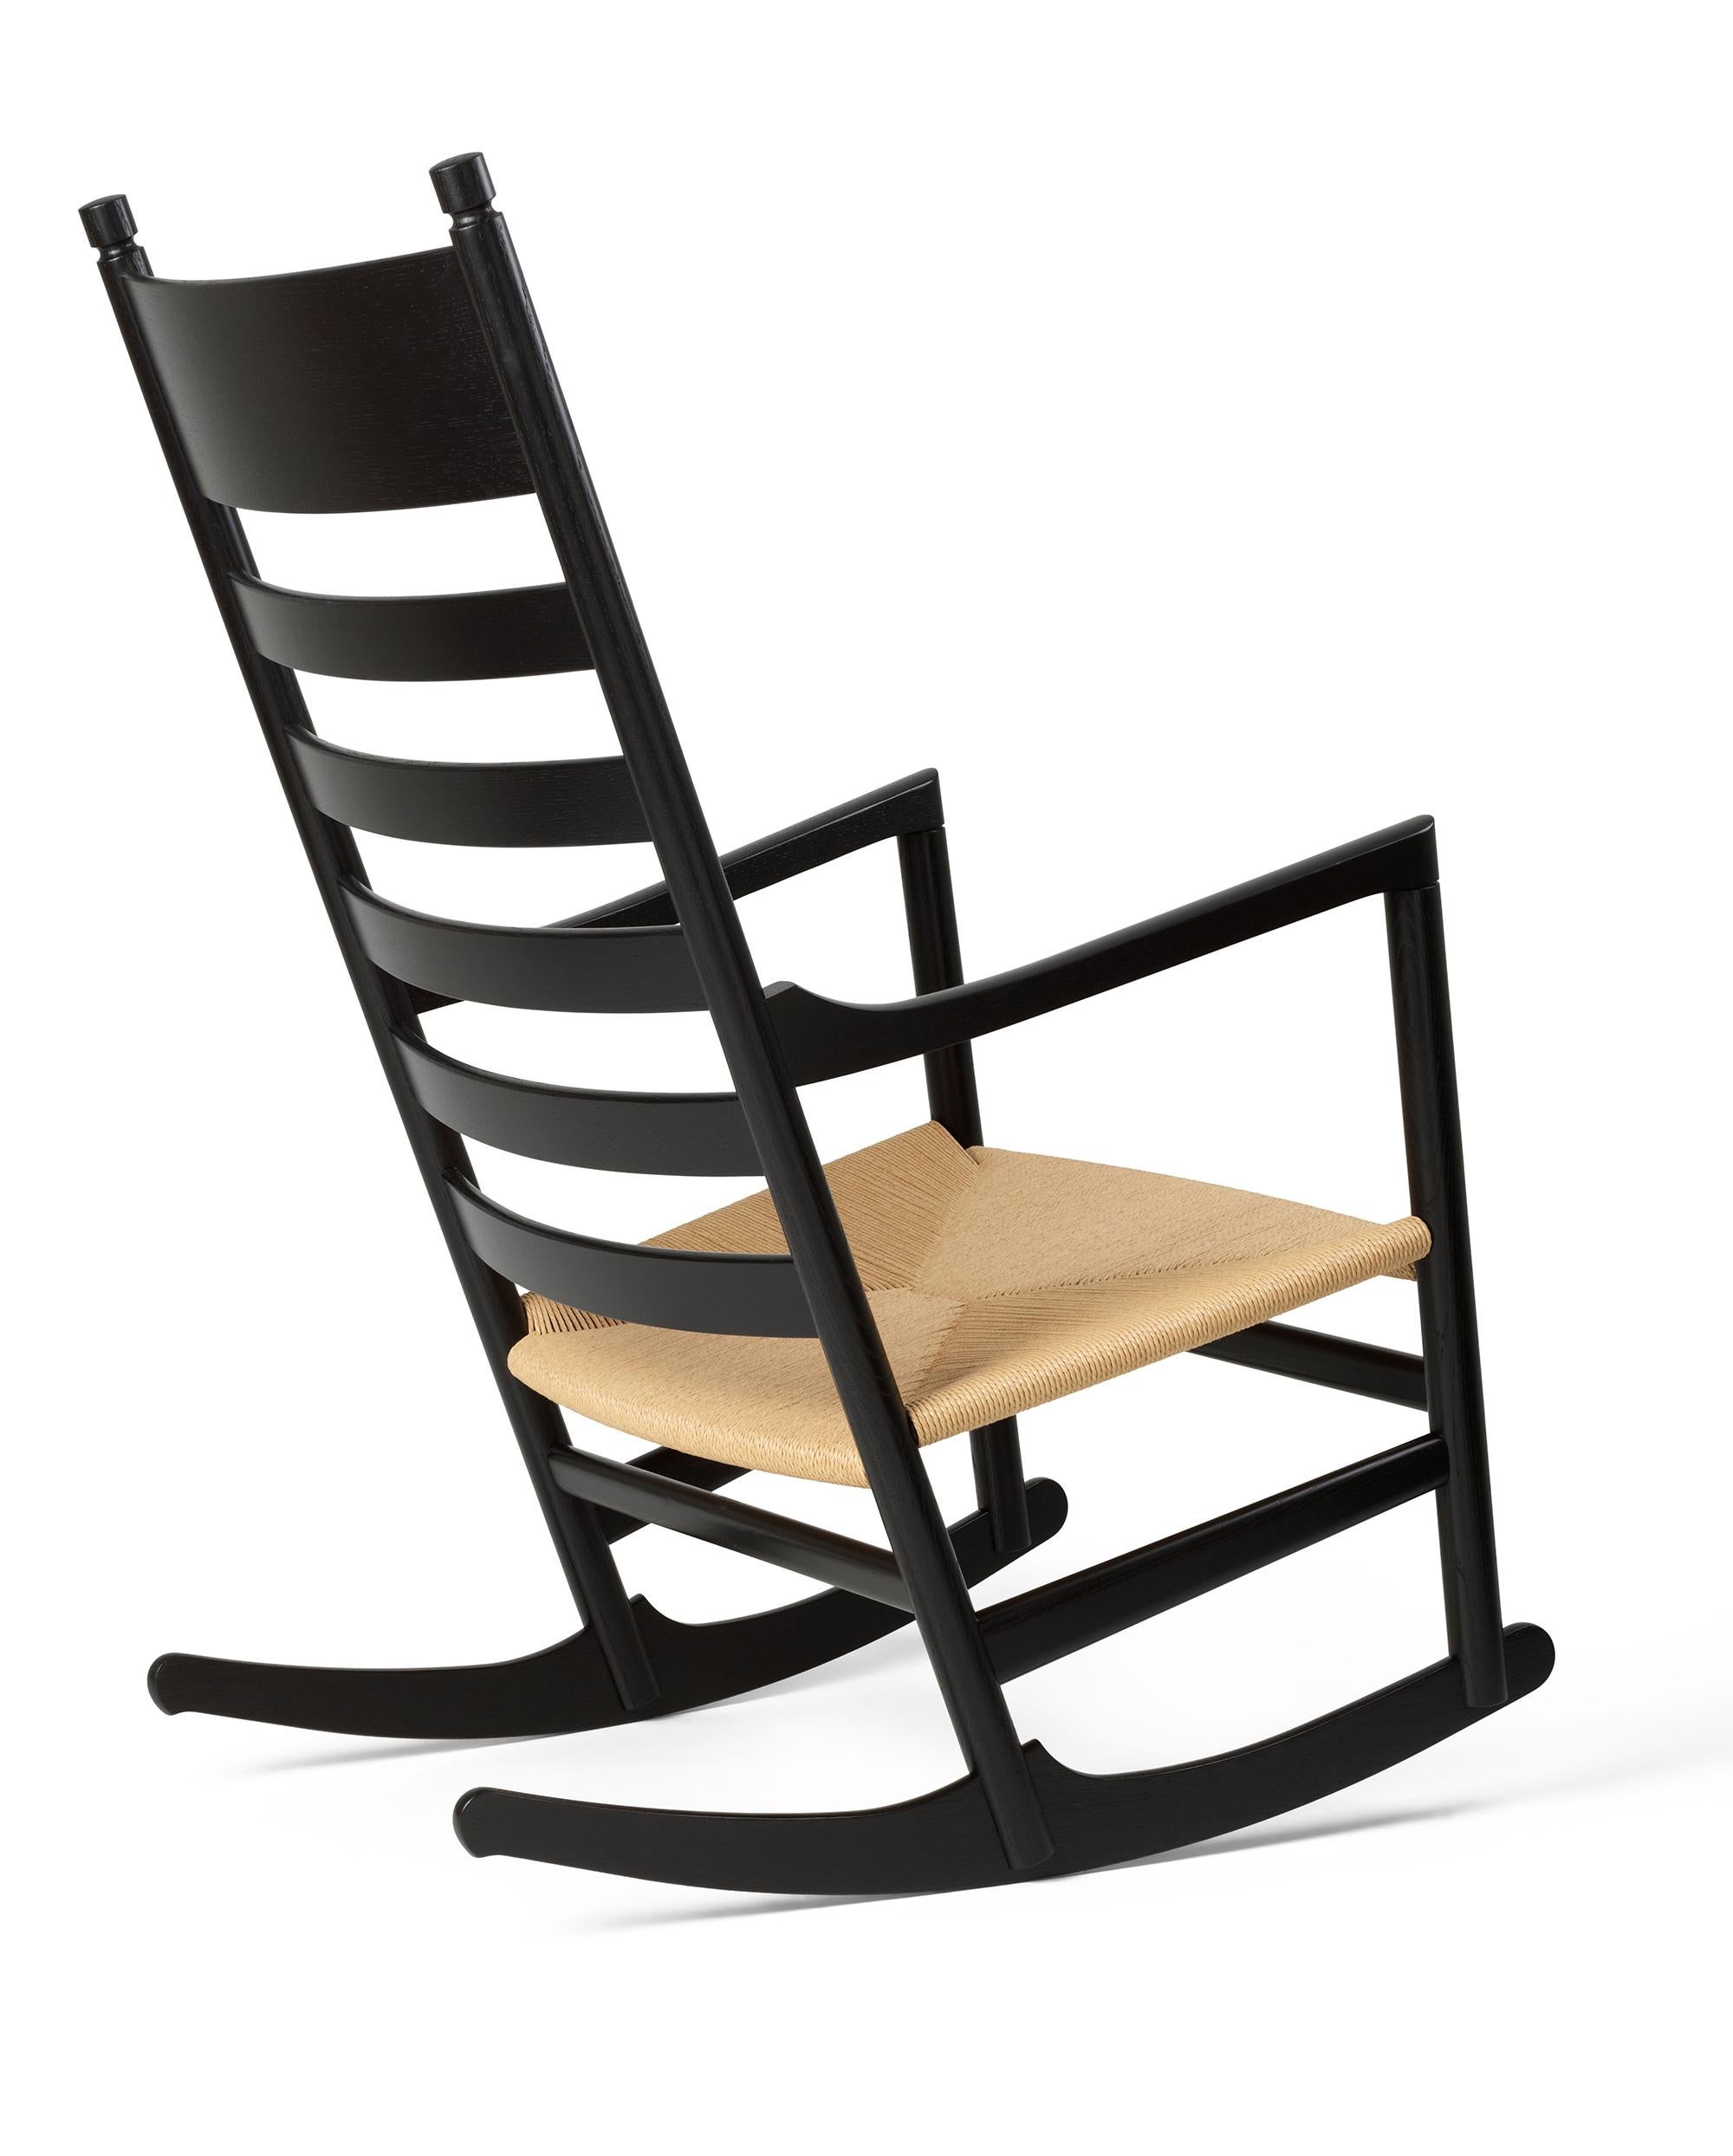 Hans J. Wegner 'CH45' Rocking Chair for Carl Hansen & Son in Black.

The story of Danish Modern begins in 1908 when Carl Hansen opened his first workshop. His firm commitment to beauty, comfort, refinement, and craftsmanship is evident in iconic